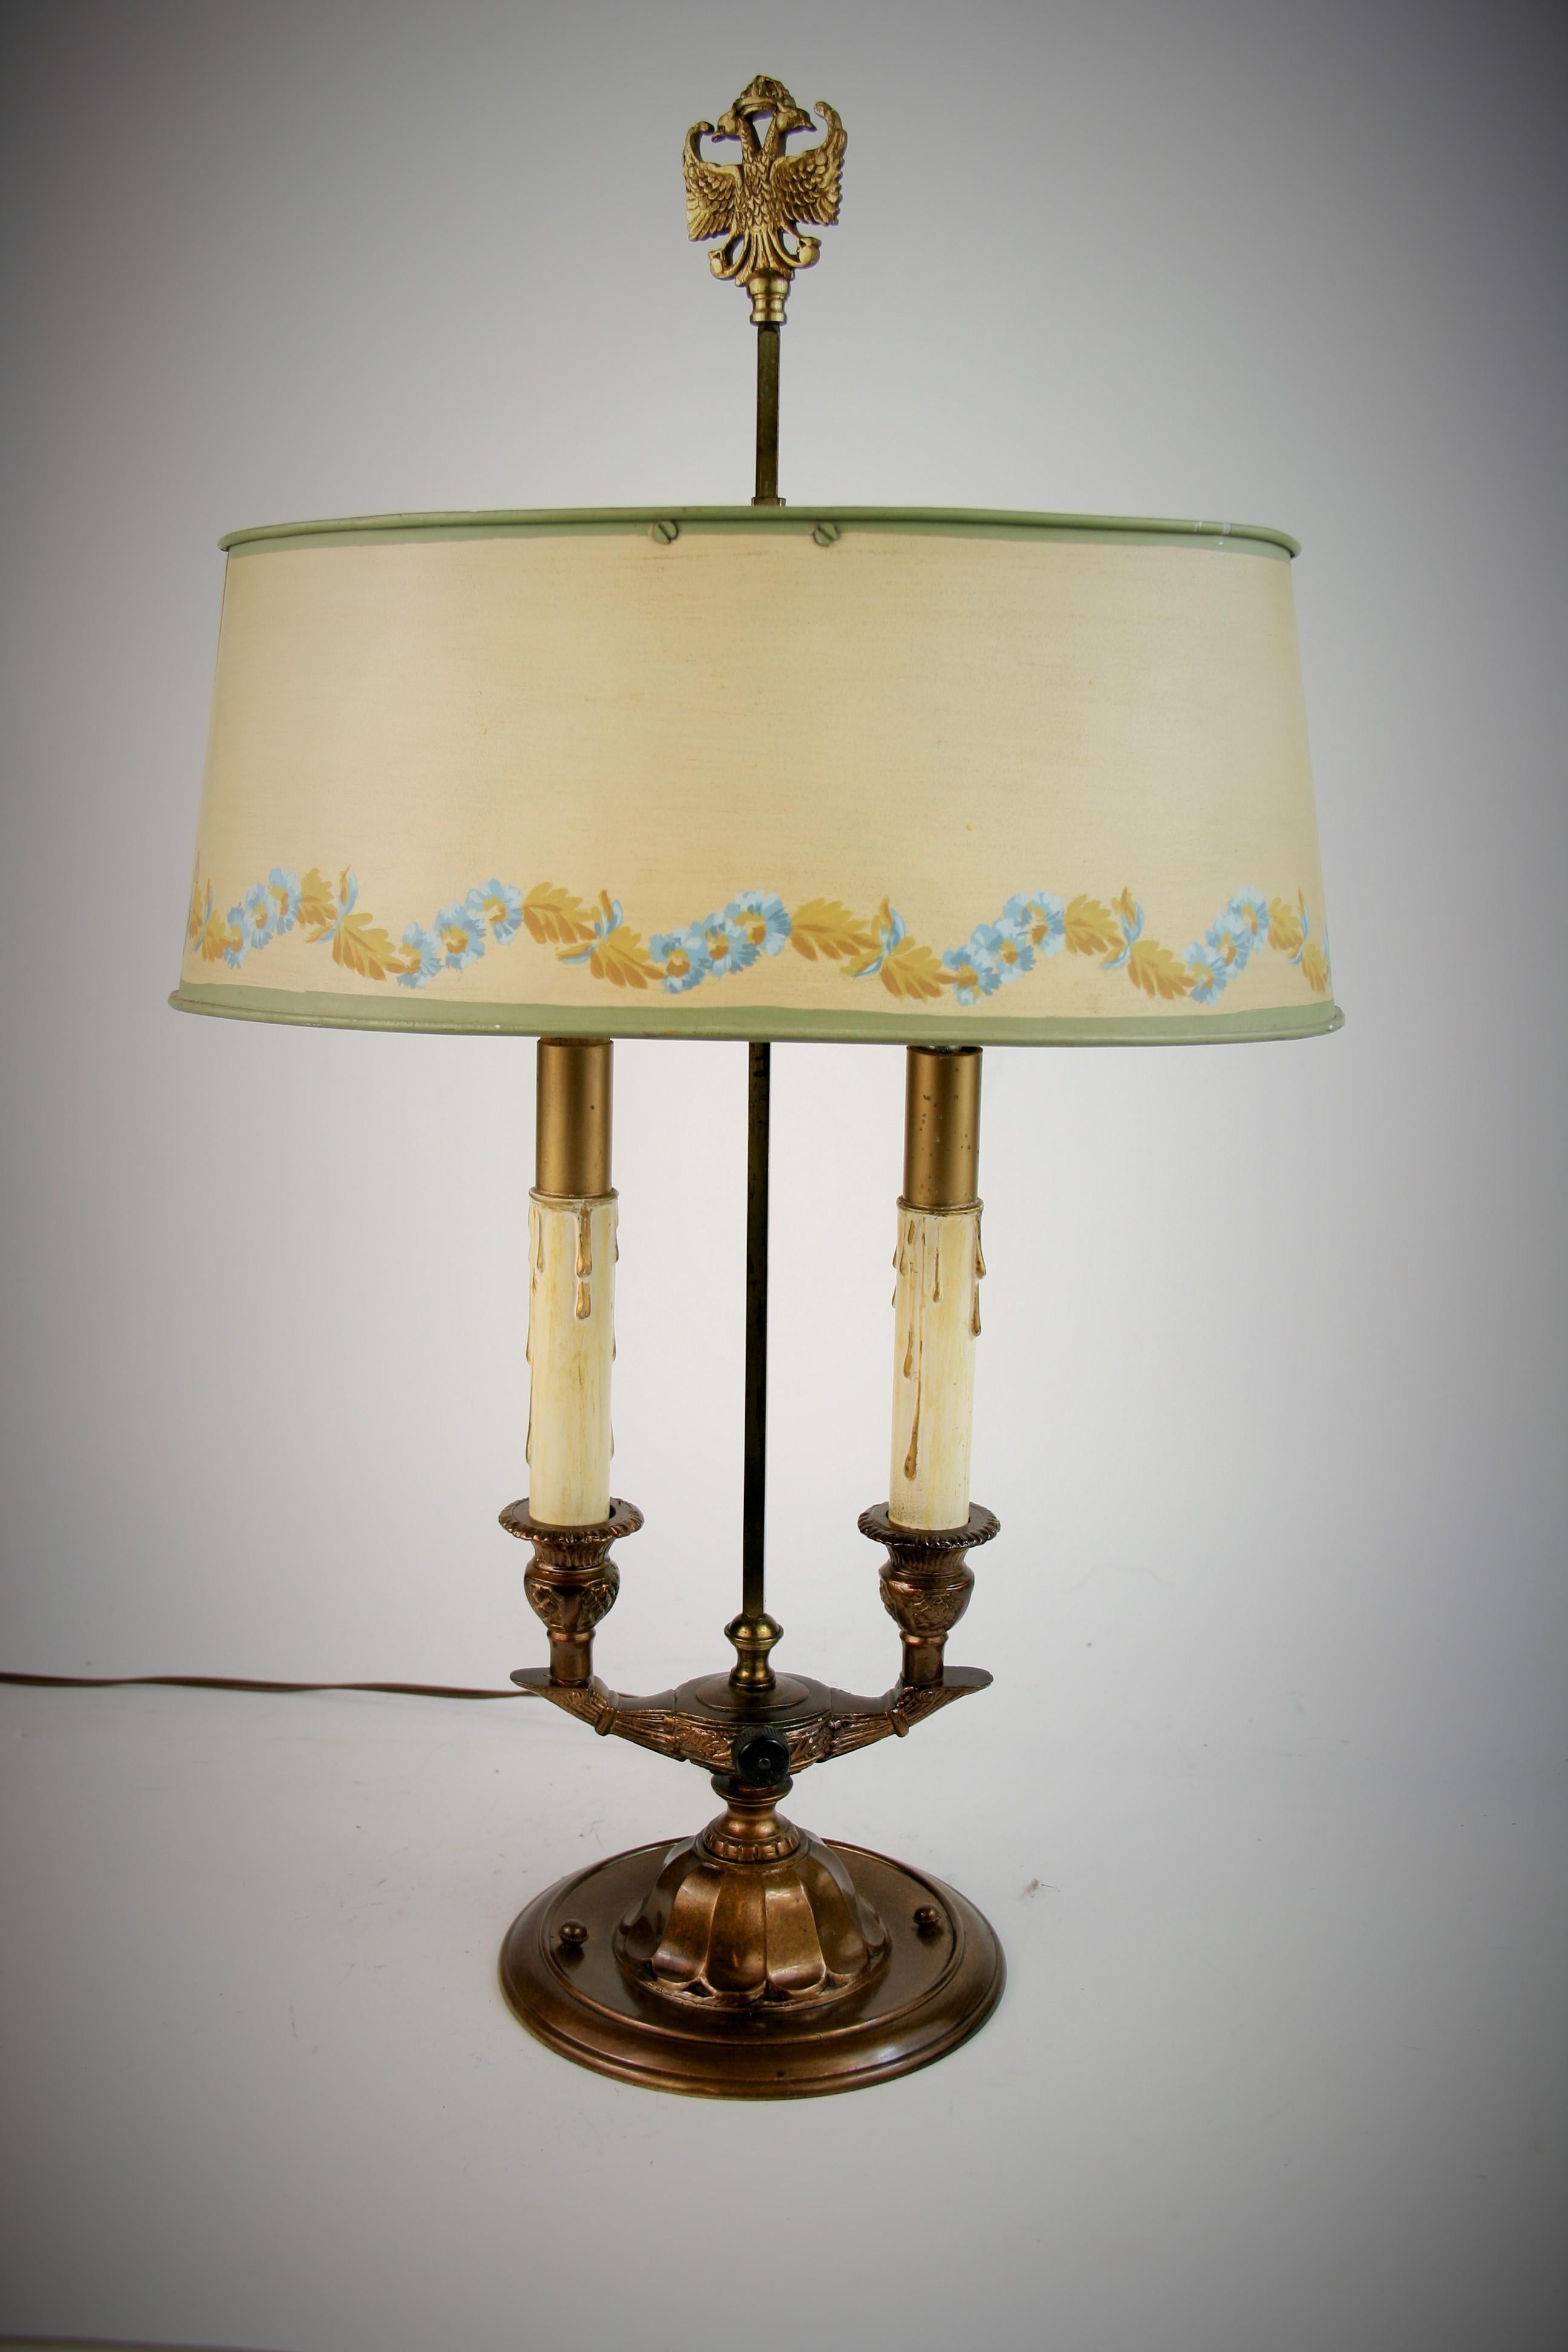 2-338 French Bouillotte table lamp with decorative metal shade
Two candelabra based bulbs 60 watt max
Original wiring in working order
Measure: Base 6